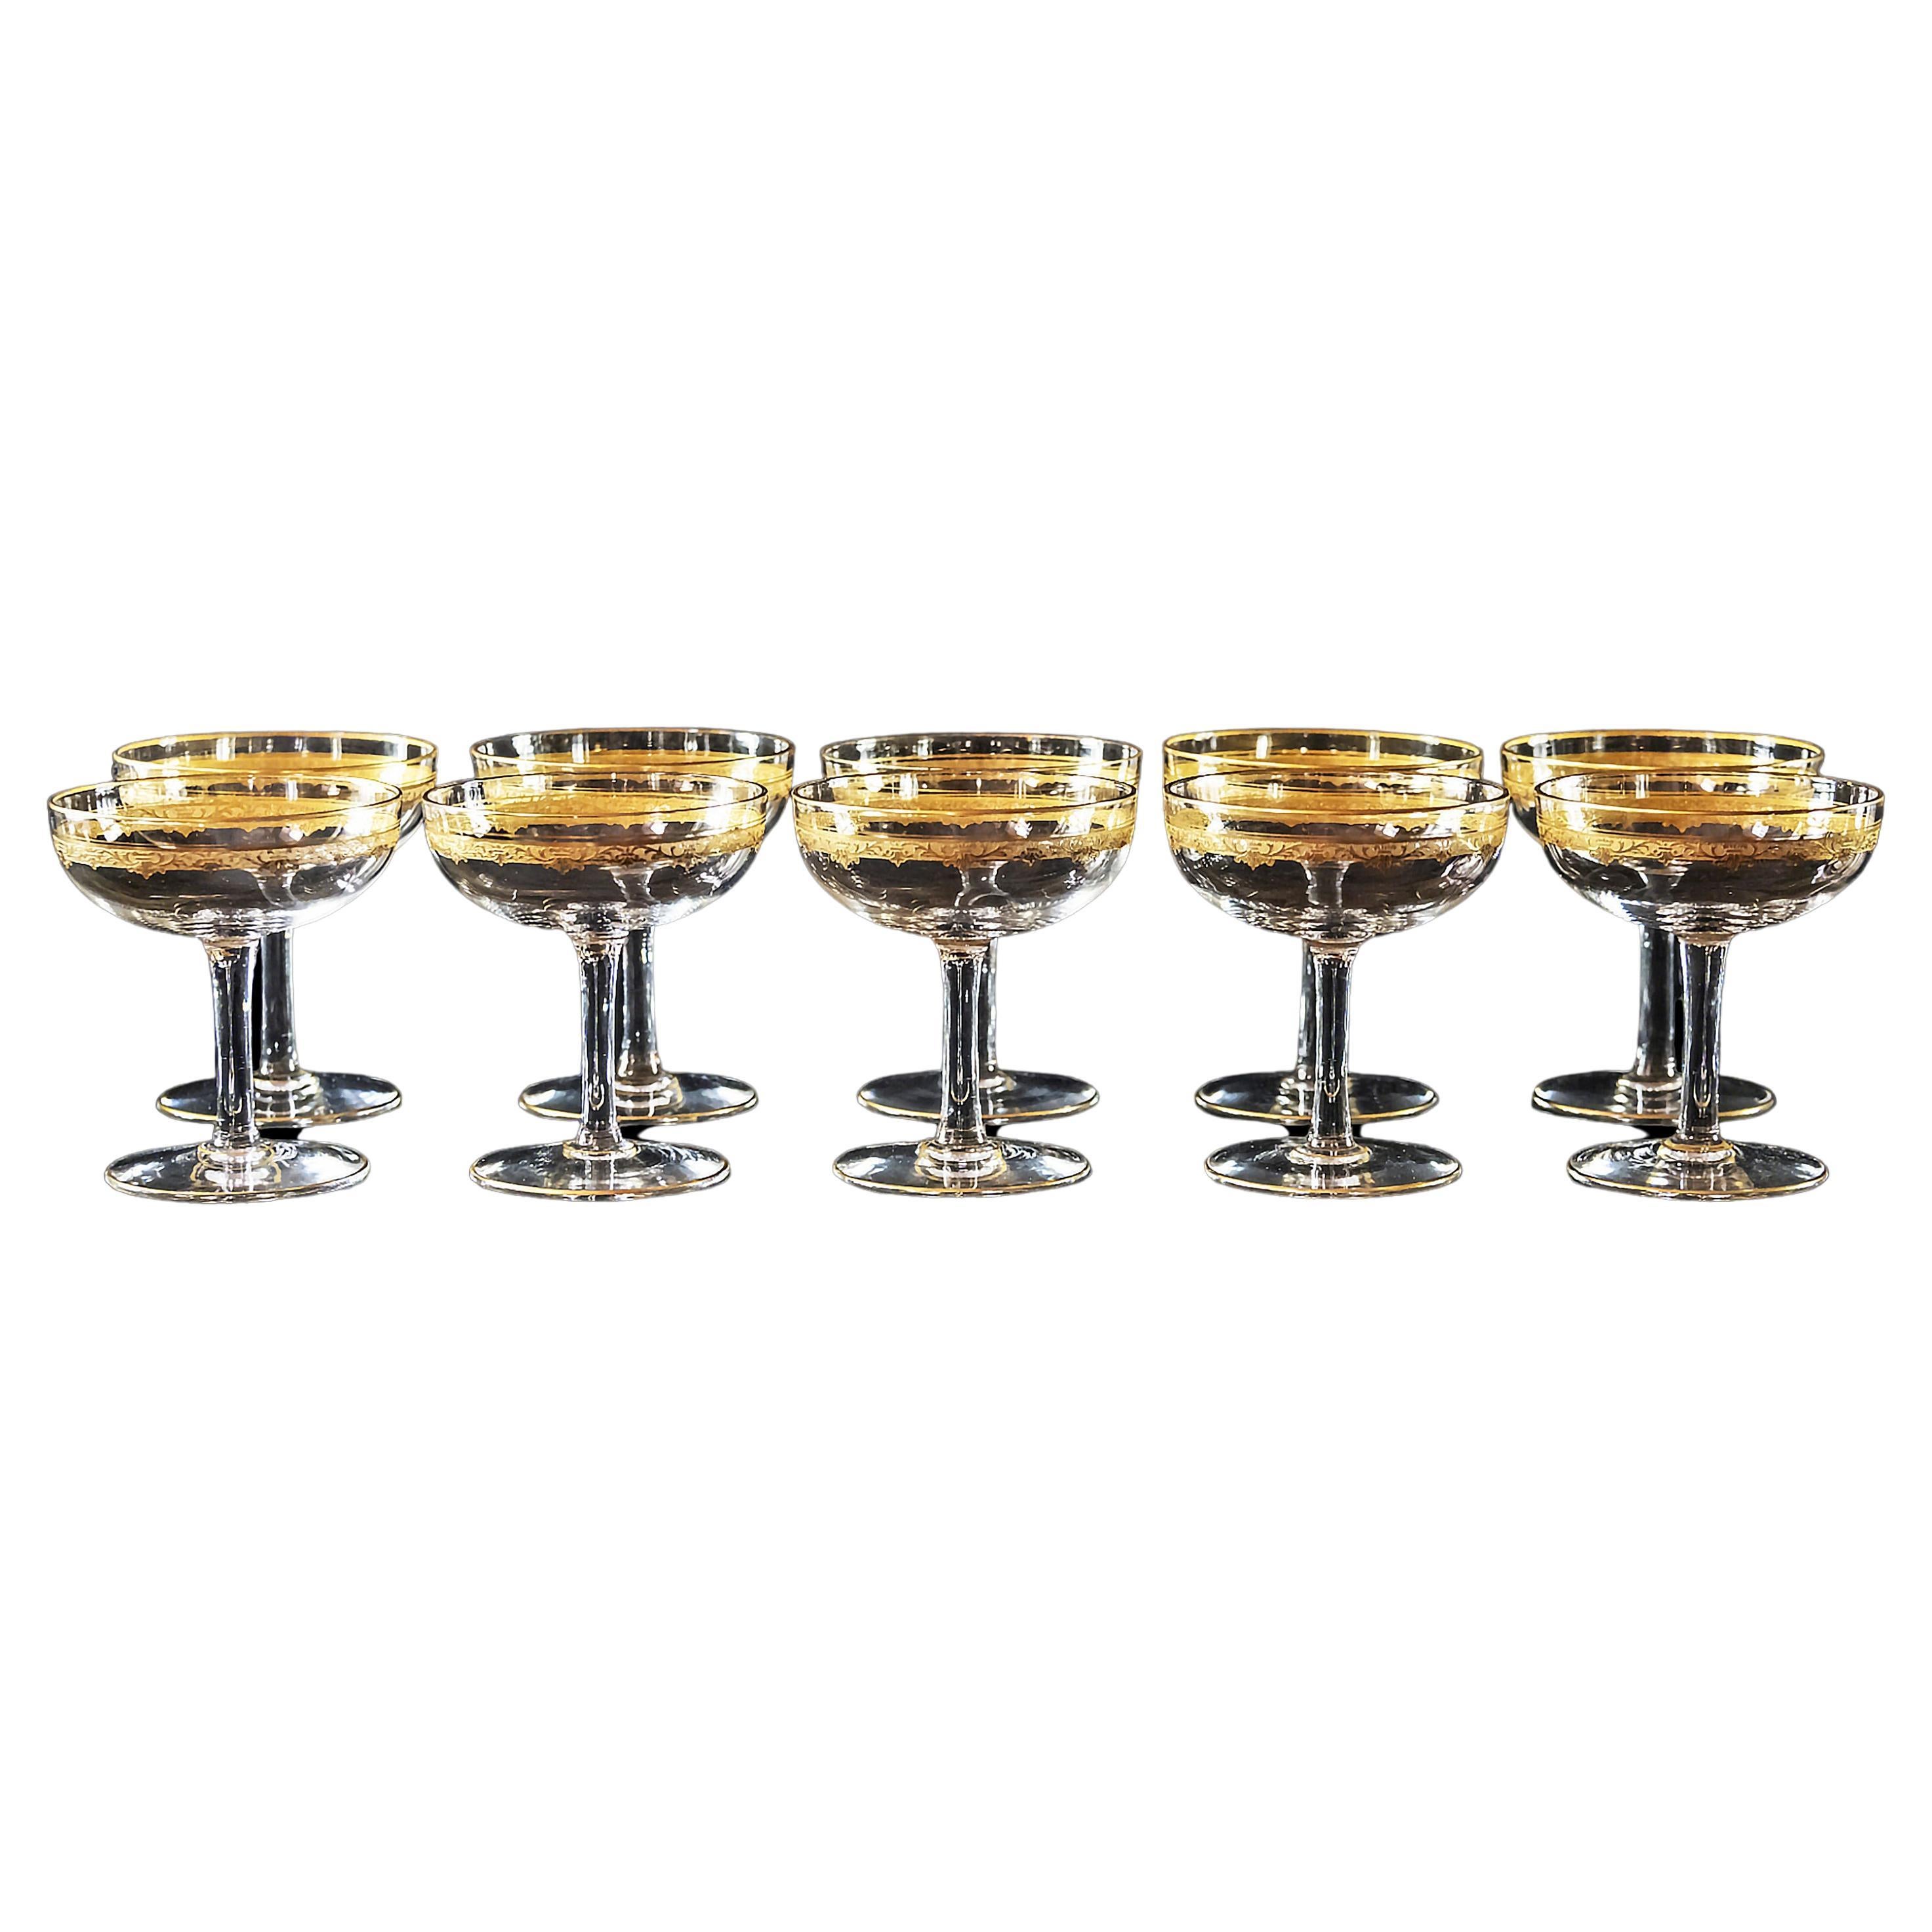 10 Pcs. Set of Saint Louis Roty Collection Gilt Crystal Champagne Coupes